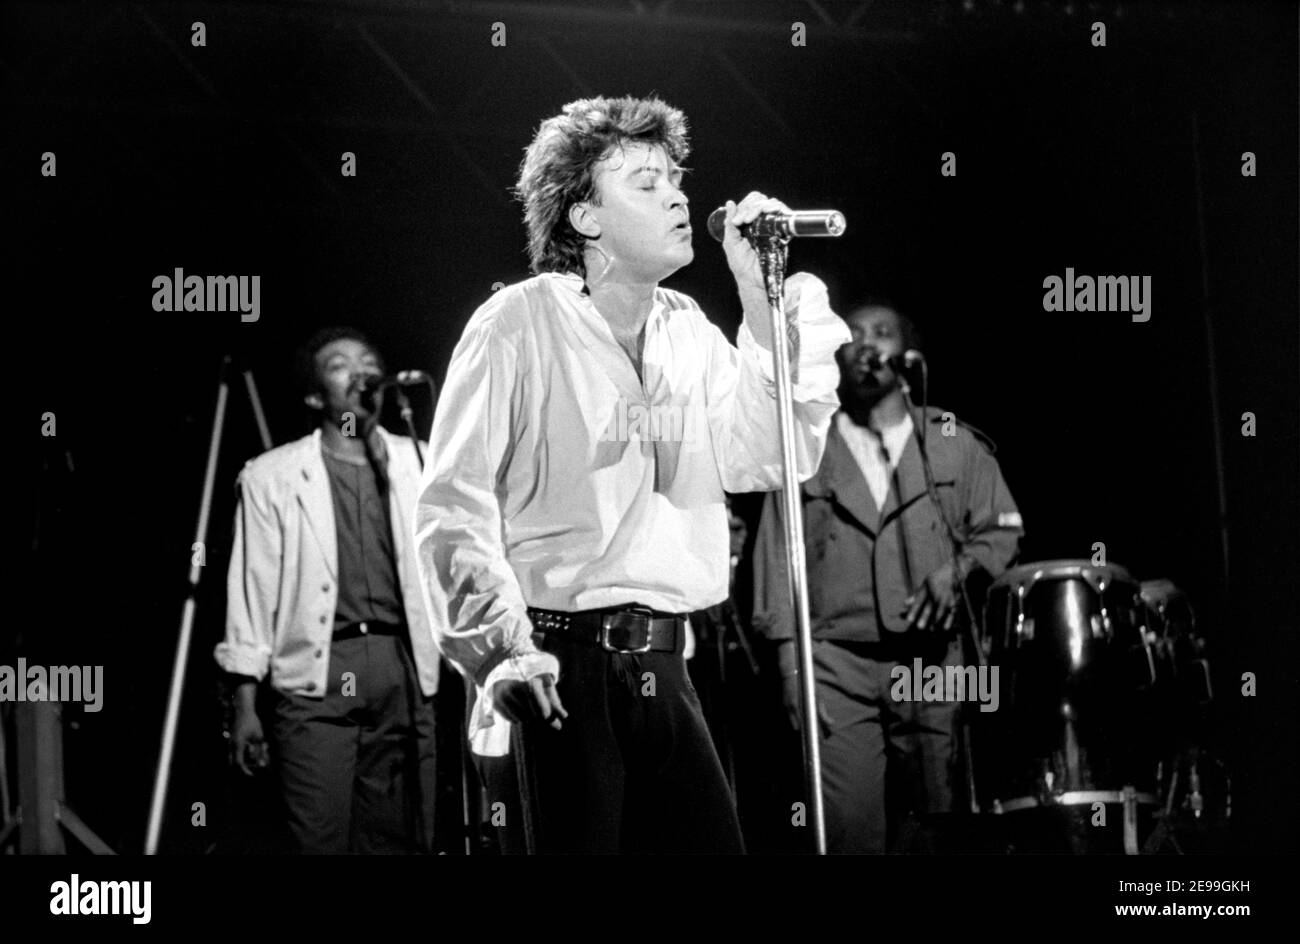 MUNSTER, GERMANY - FEB 02, 1992: Paul Young is an English singer, songwriter and musician. Here he is live on stage during a concert in Germany. Stock Photo